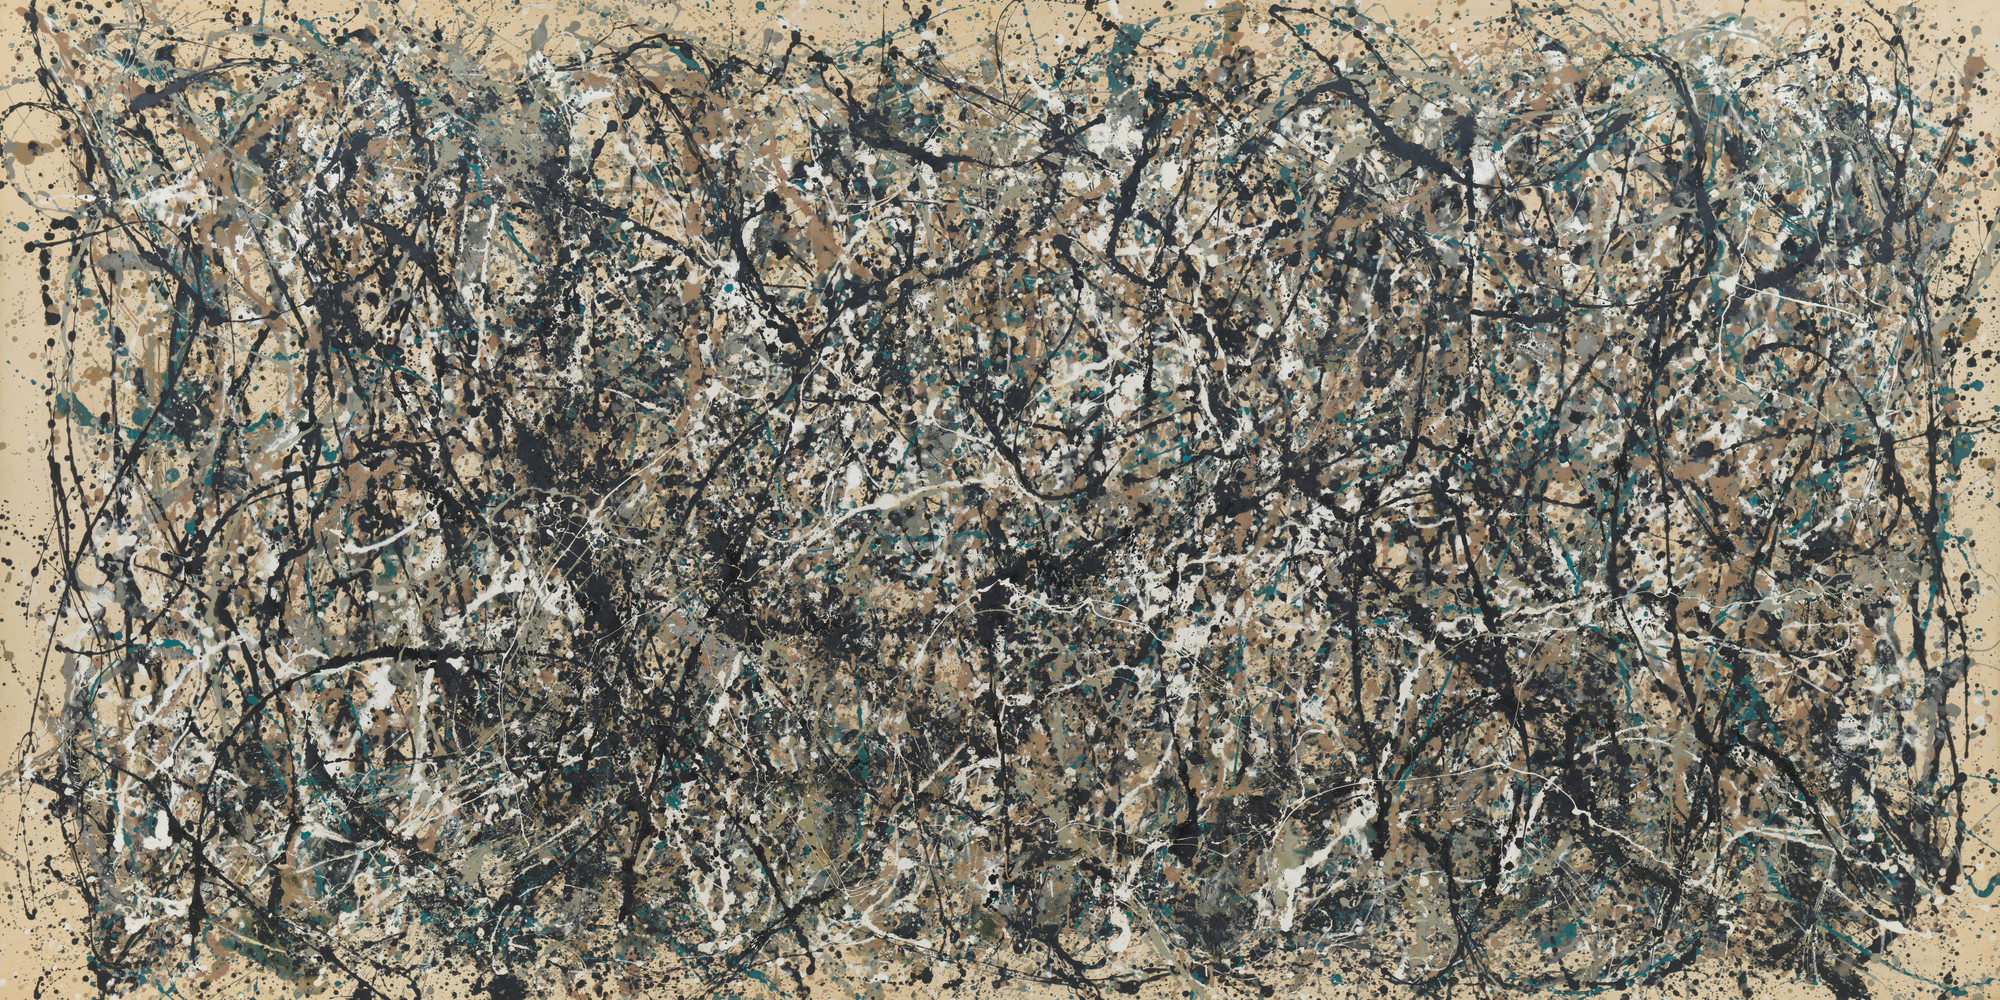 Jackson Pollock. One: Number 31, 1950. 1950. Oil and enamel paint on canvas, 8&#39; 10&#34; x 17&#39; 5 5/8&#34; (269.5 x 530.8 cm). Sidney and Harriet Janis Collection Fund (by exchange). Conservation was made possible by the Bank of America Art Conservation Project. © 2020 Pollock-Krasner Foundation/Artists Rights Society (ARS), New York